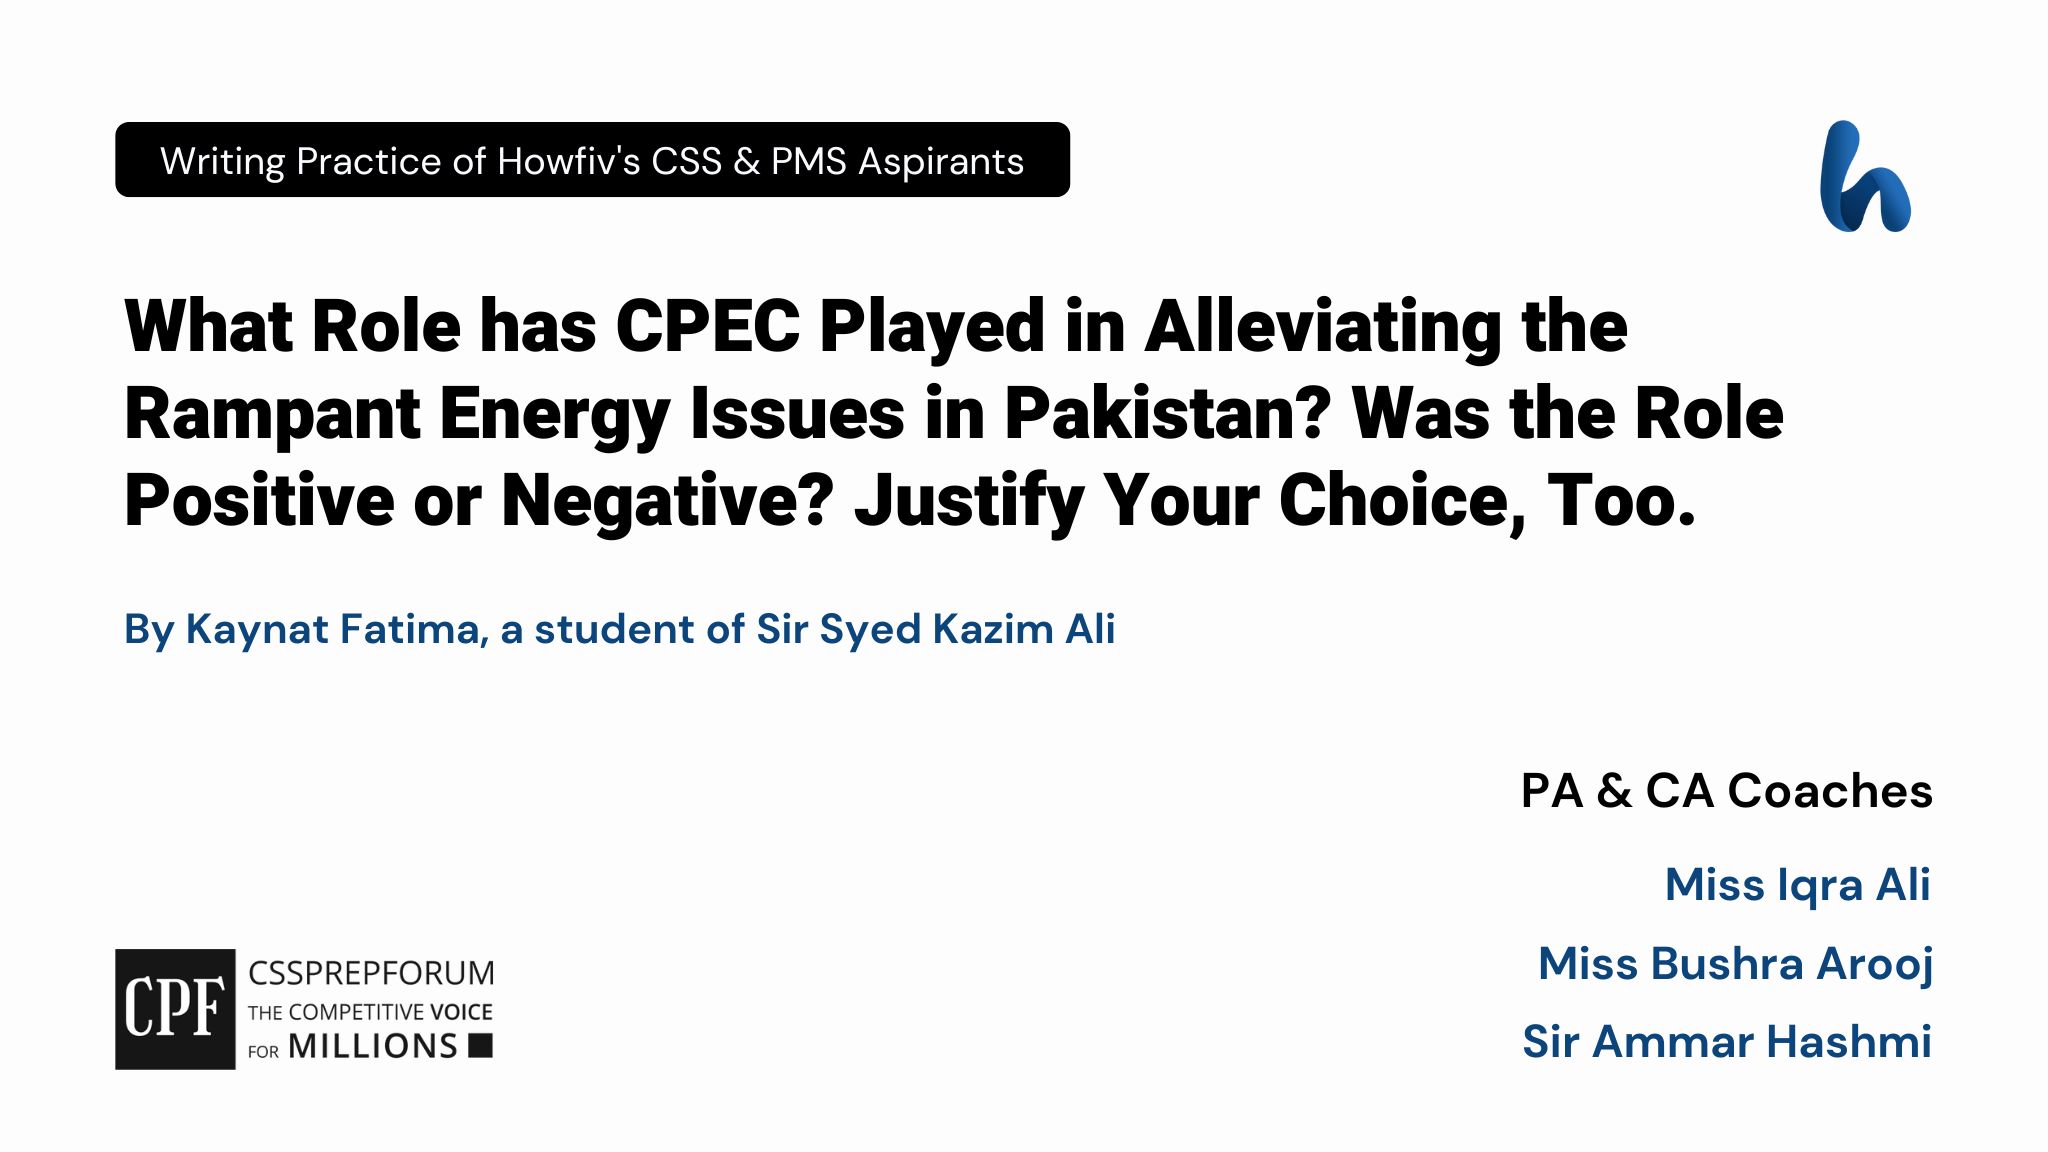 CSS Current Affairs Article | Role CPEC Played in Alleviating the Rampant Energy Issues in Pakistan | is written by Kaynat Fatima under the supervision of Sir Ammar Hashmi...